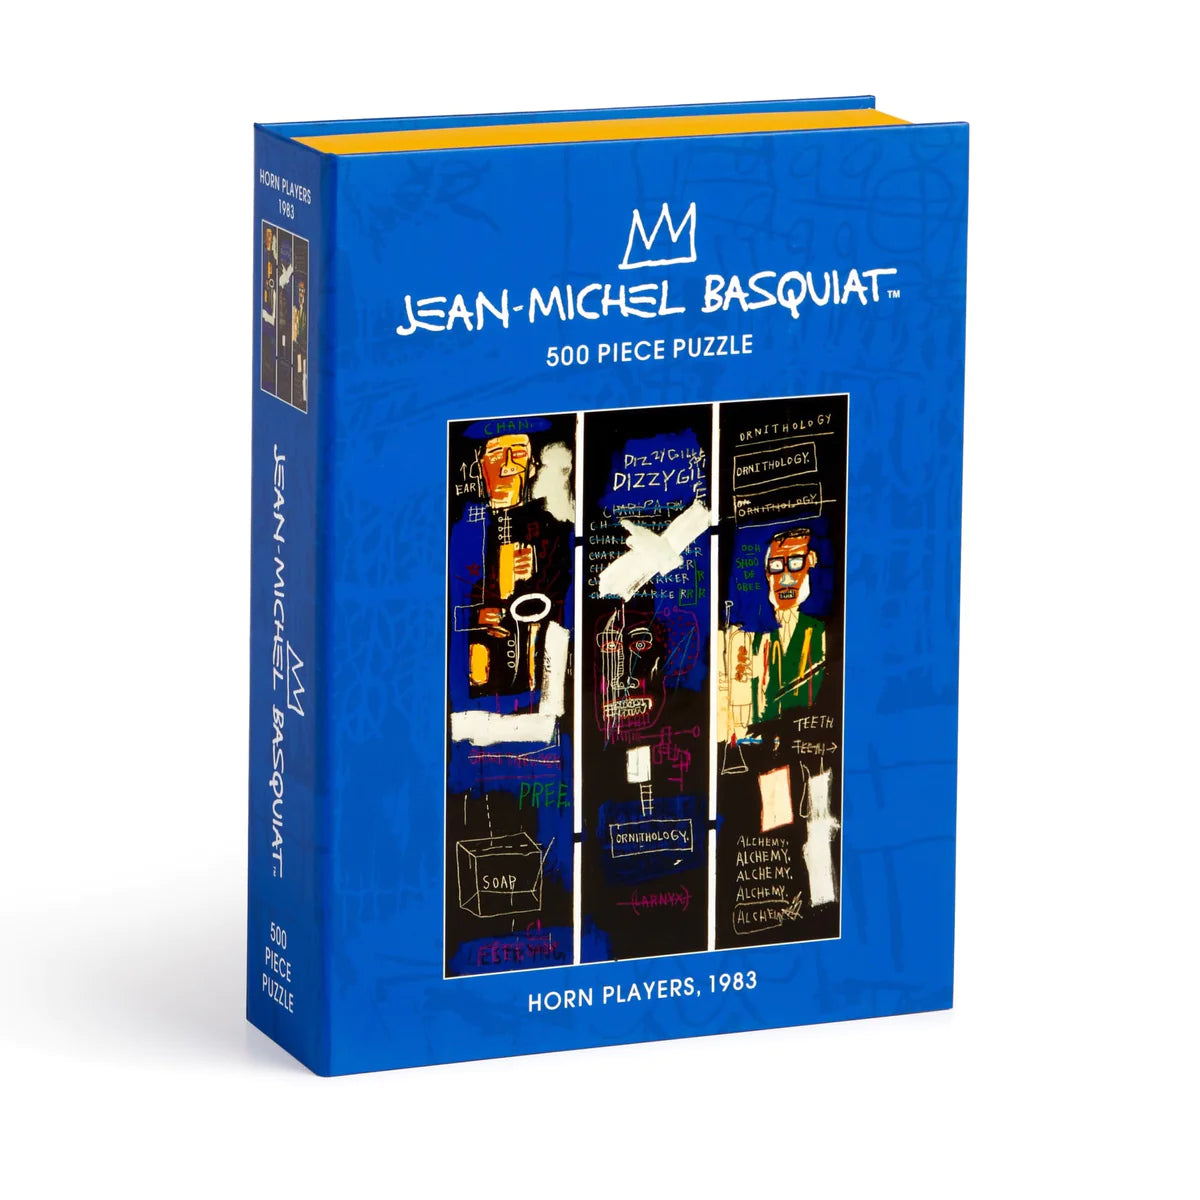 BASQUIAT HORN PLAYERS BOOK PUZZLE